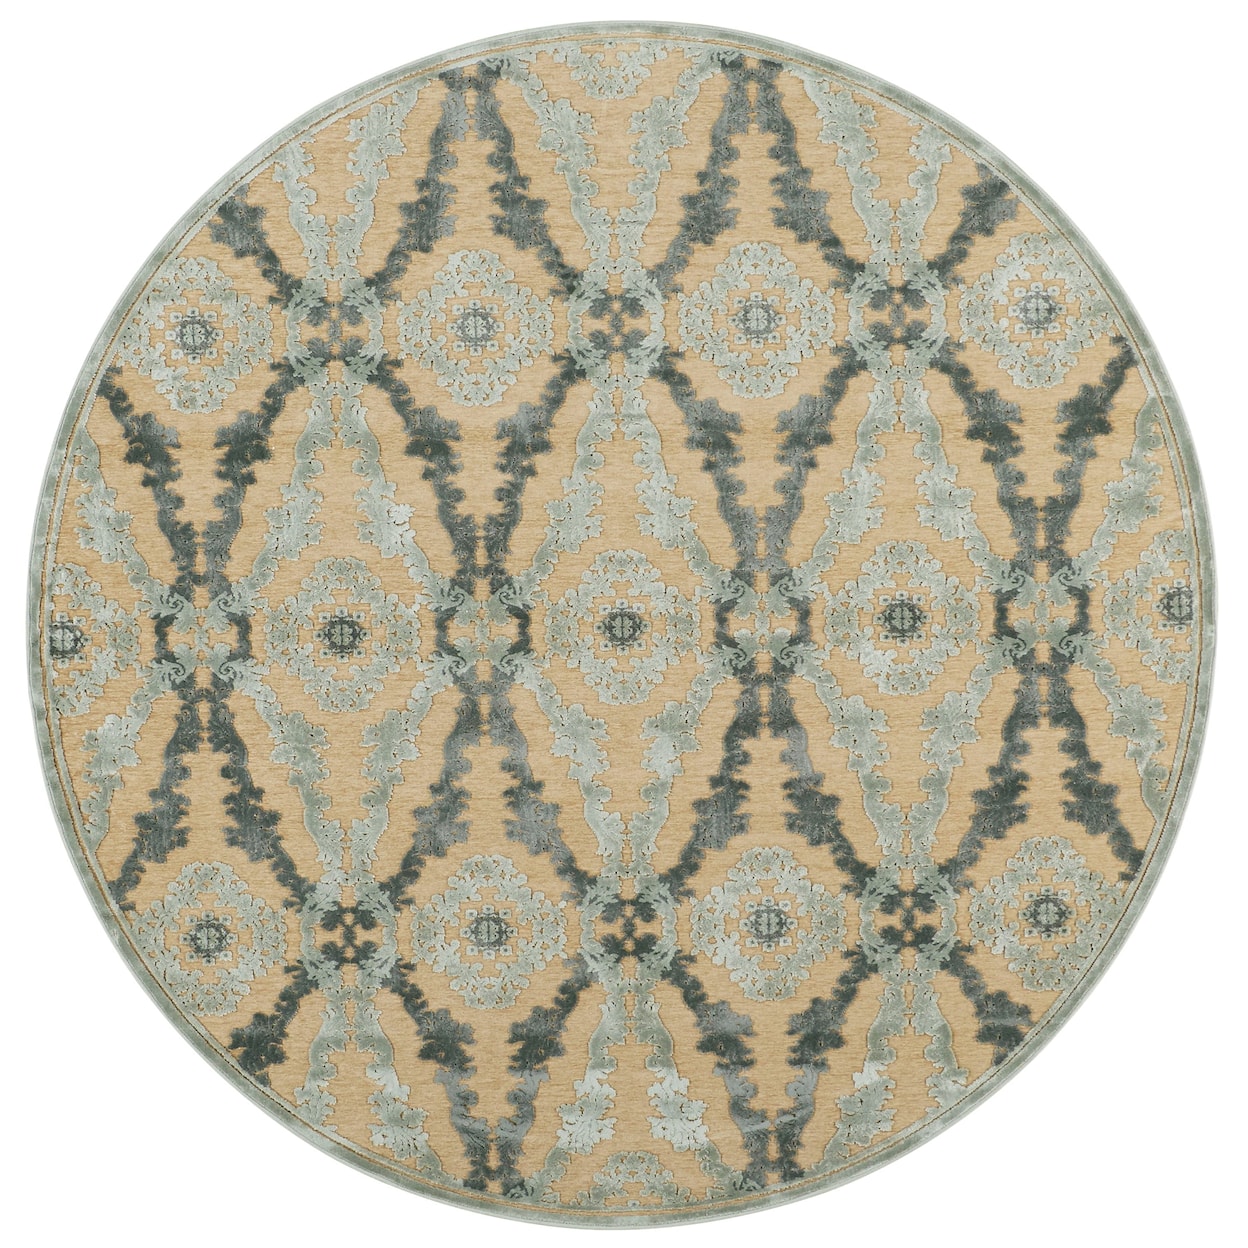 Feizy Rugs Saphir Ivory/Silver 7'-6" X 10'-6" Area Rug